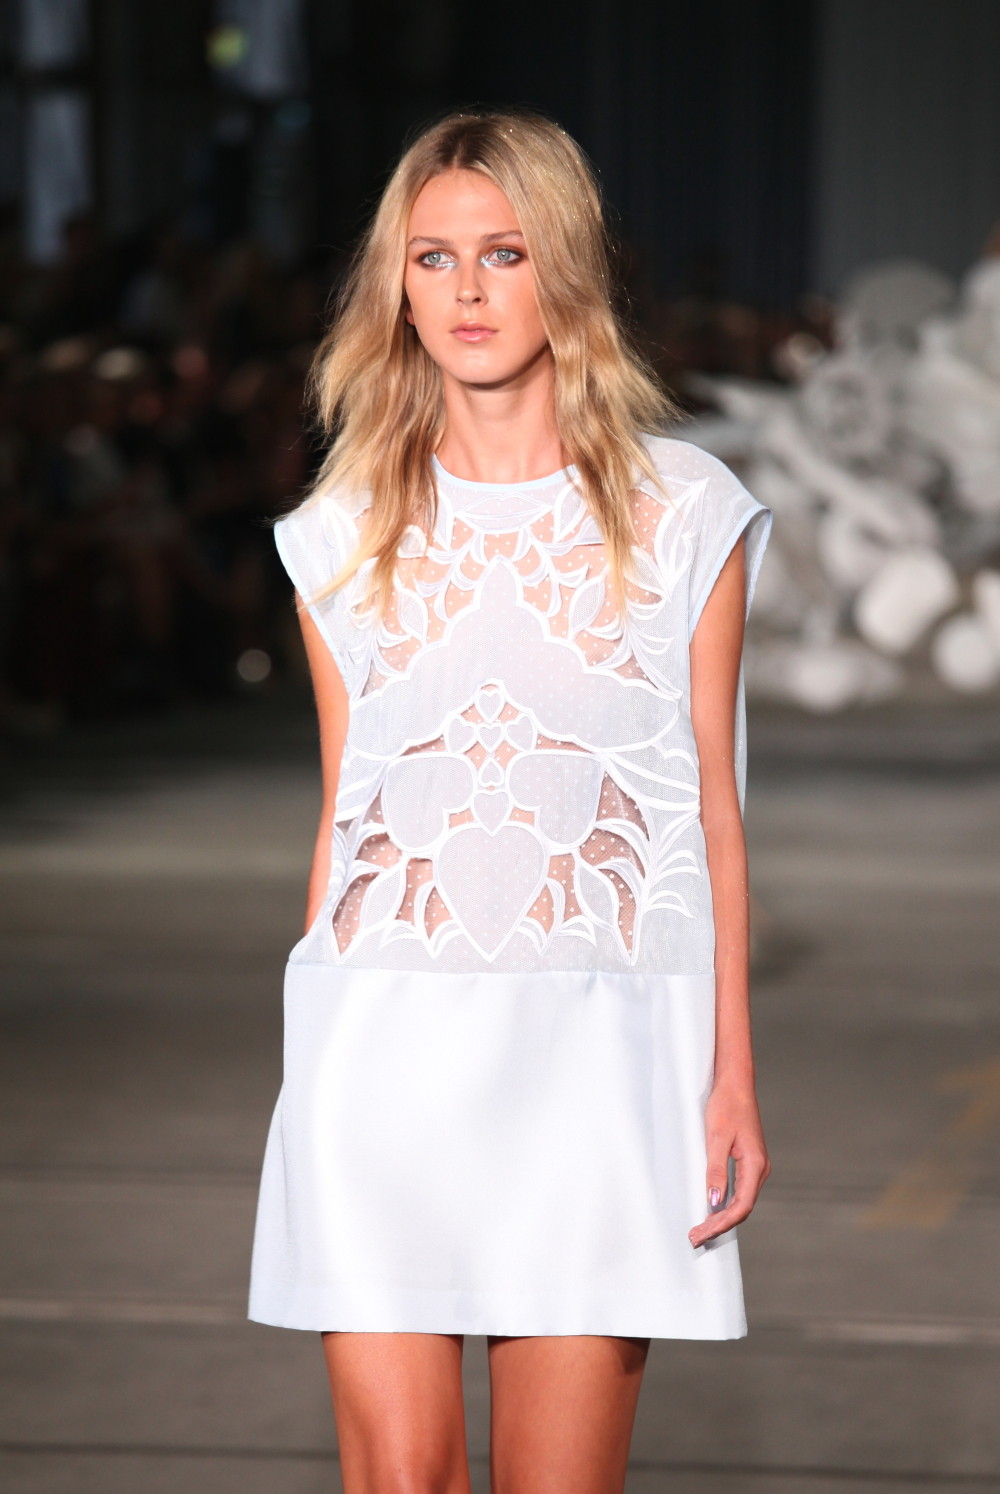 Alice McCall ‘In my dreams we were flying’ Cruise 2014/15 at MBFWA ...